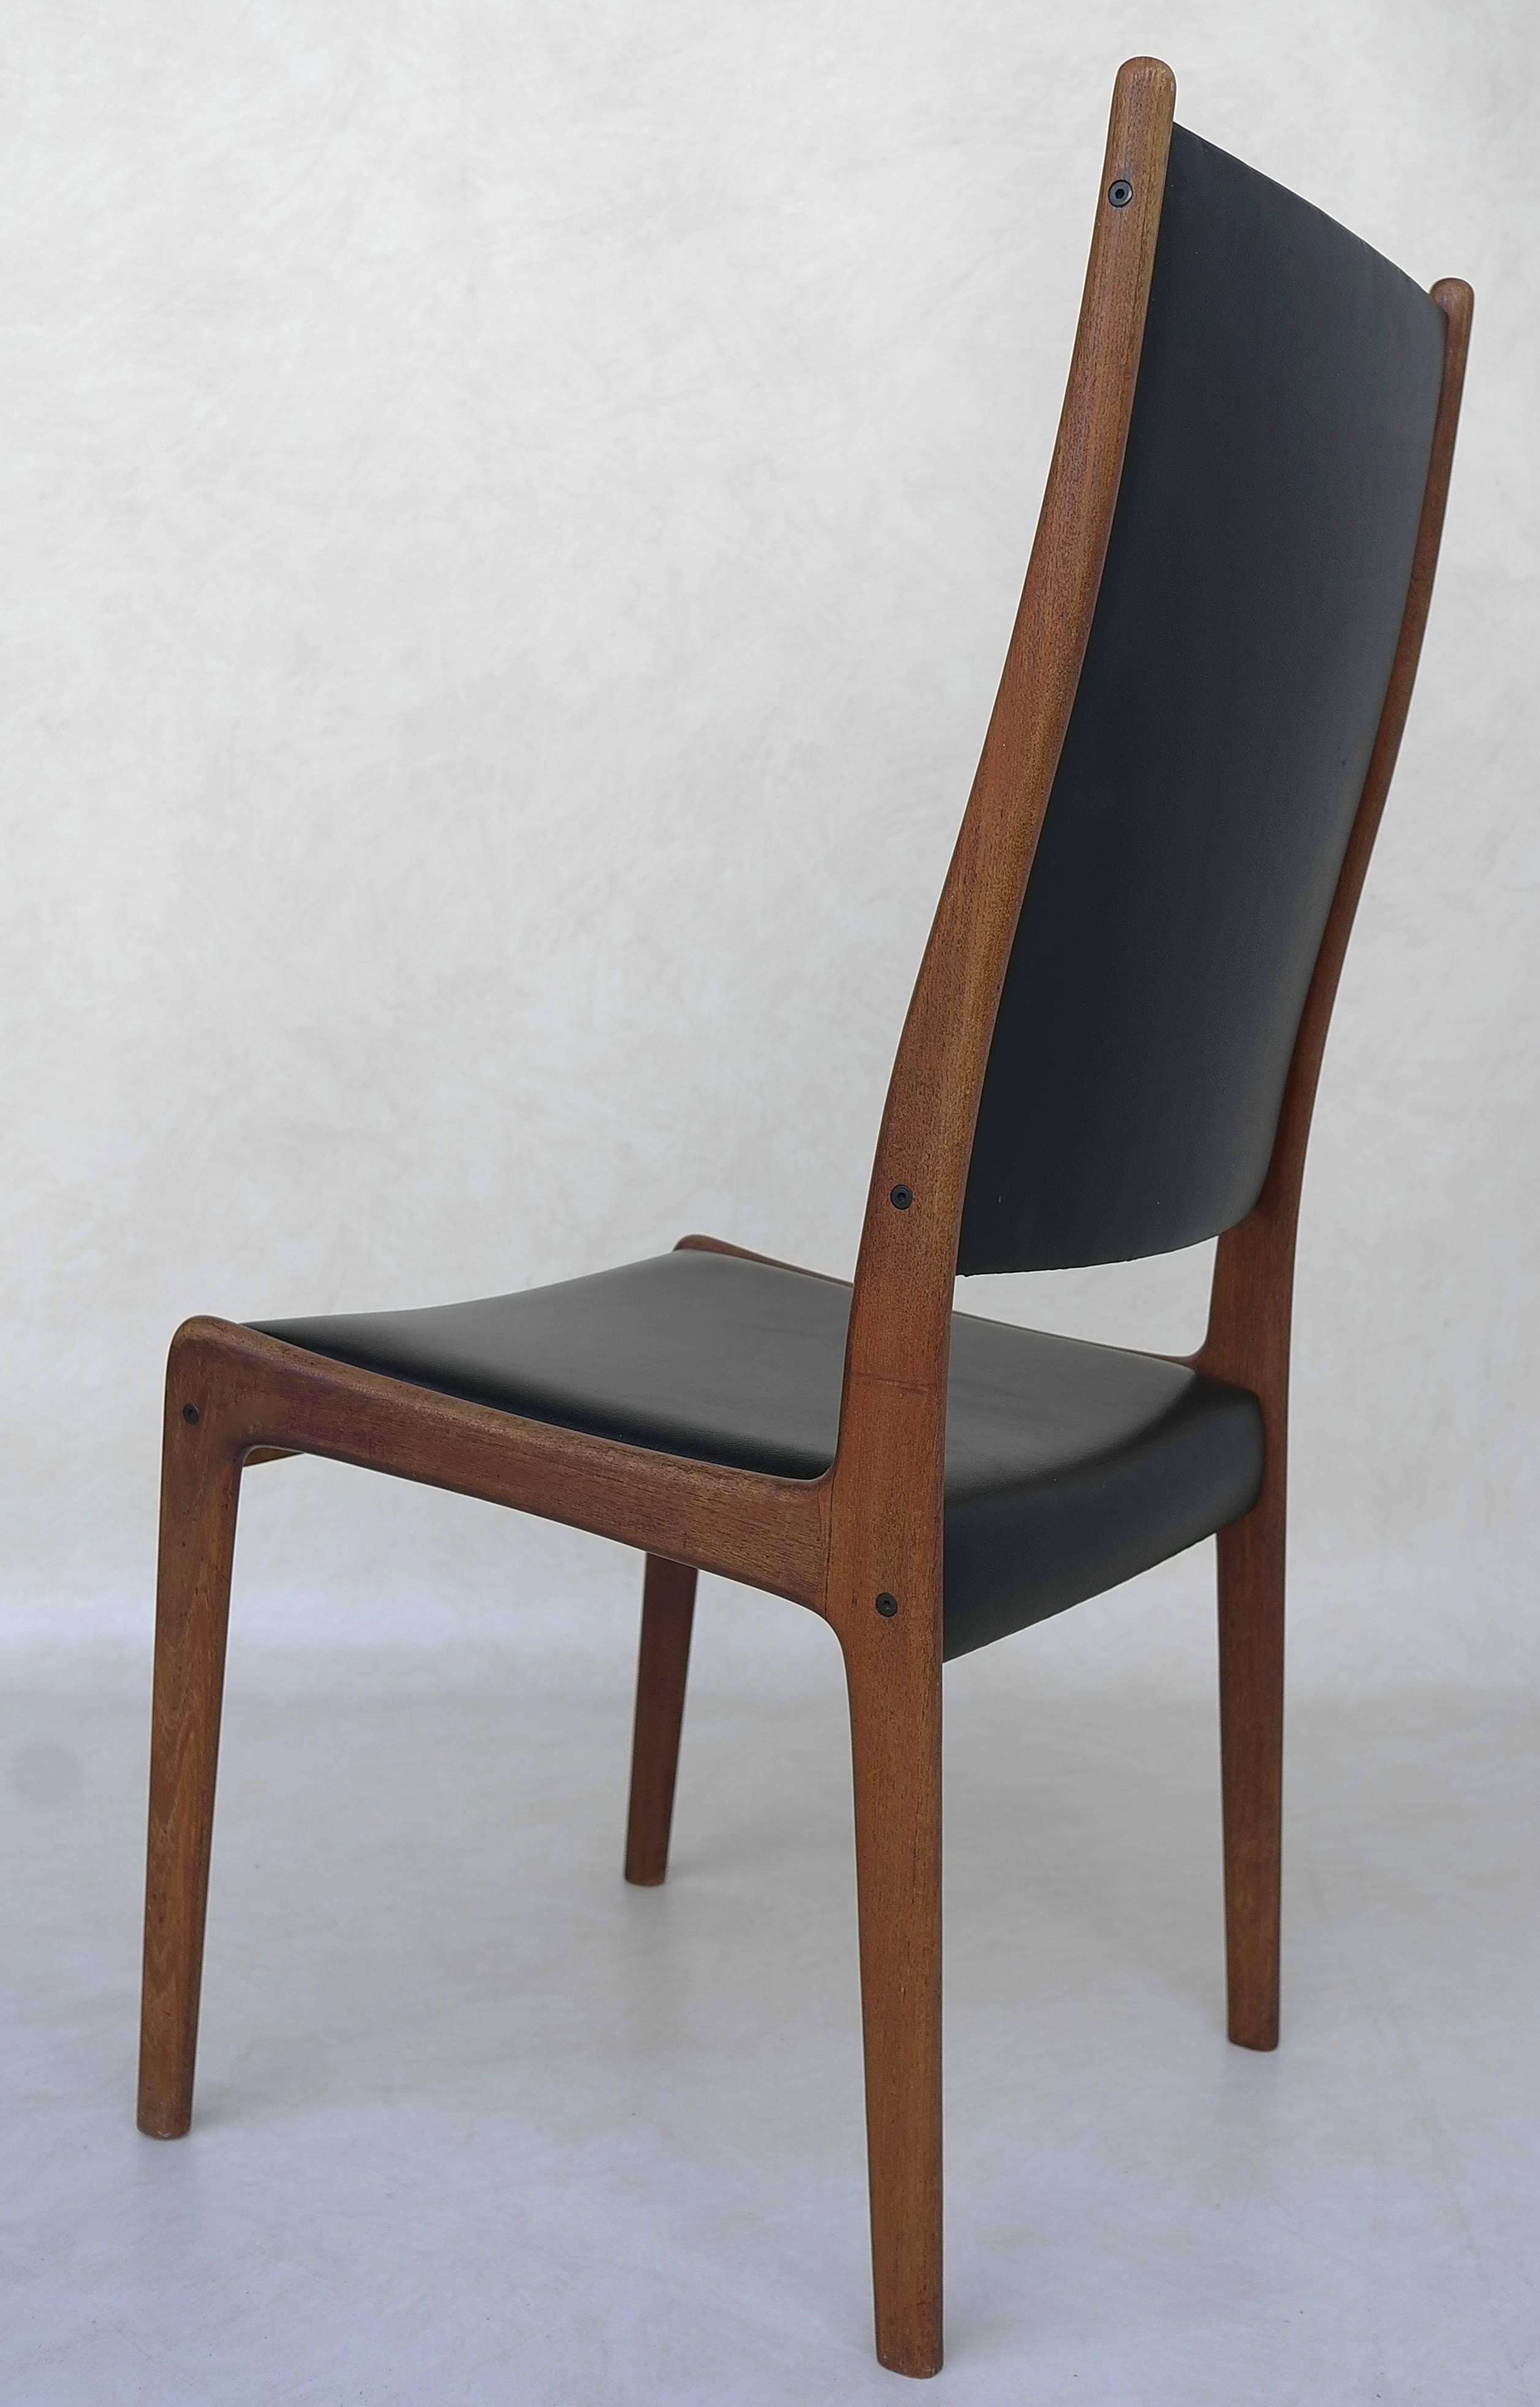 Set of six high back dining chairs by Johannes Andersen in teak.

Designer Johannes Andersen was born in 1903 in Aarhus, Denmark, and he initially apprenticed as a cabinetmaker. He went on to work for many years in a number of workshops before